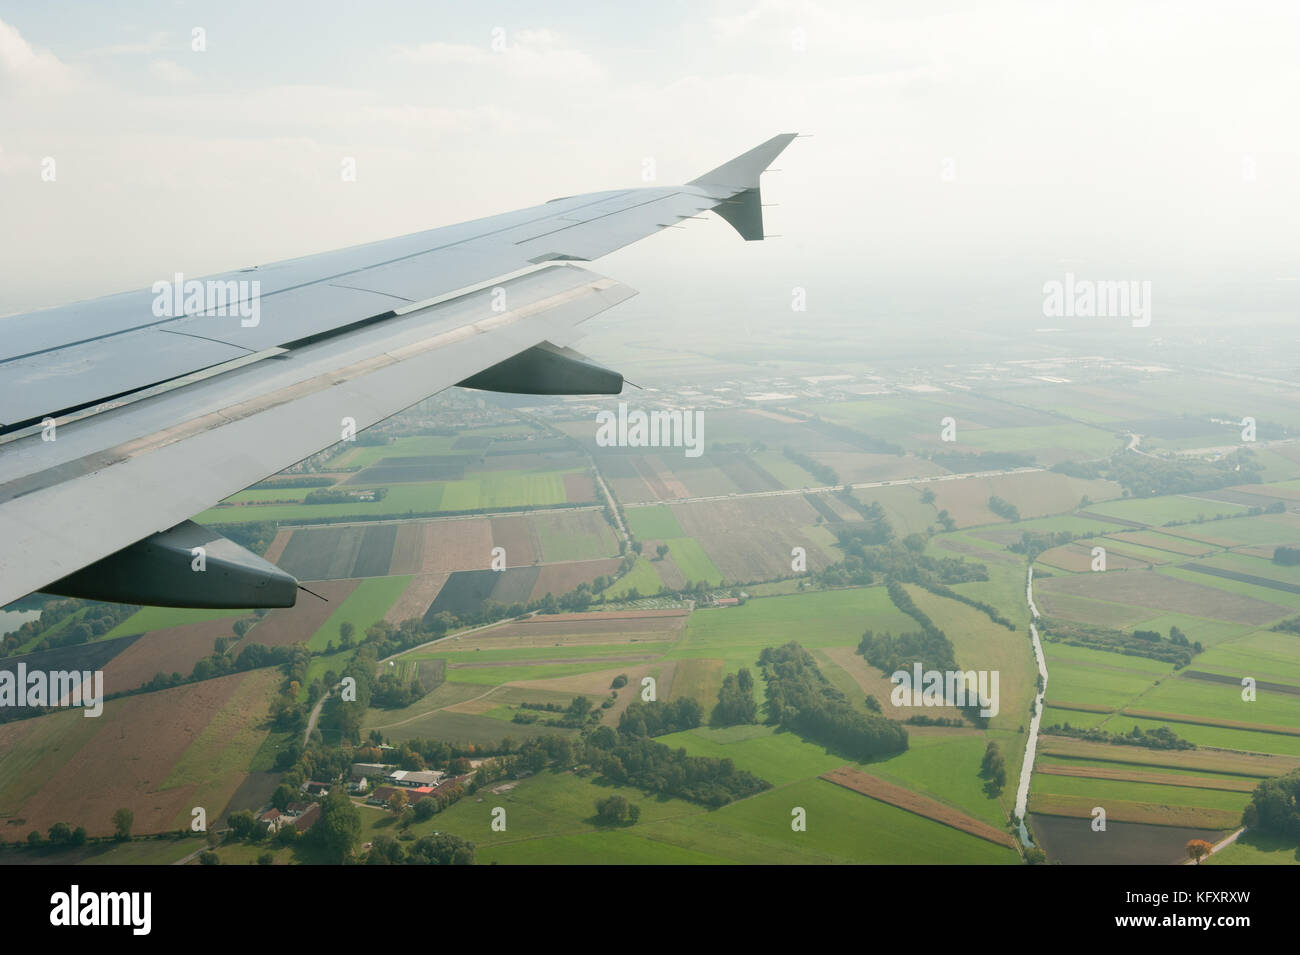 Wing of an in-flight plane Airbus during at flight Stock Photo